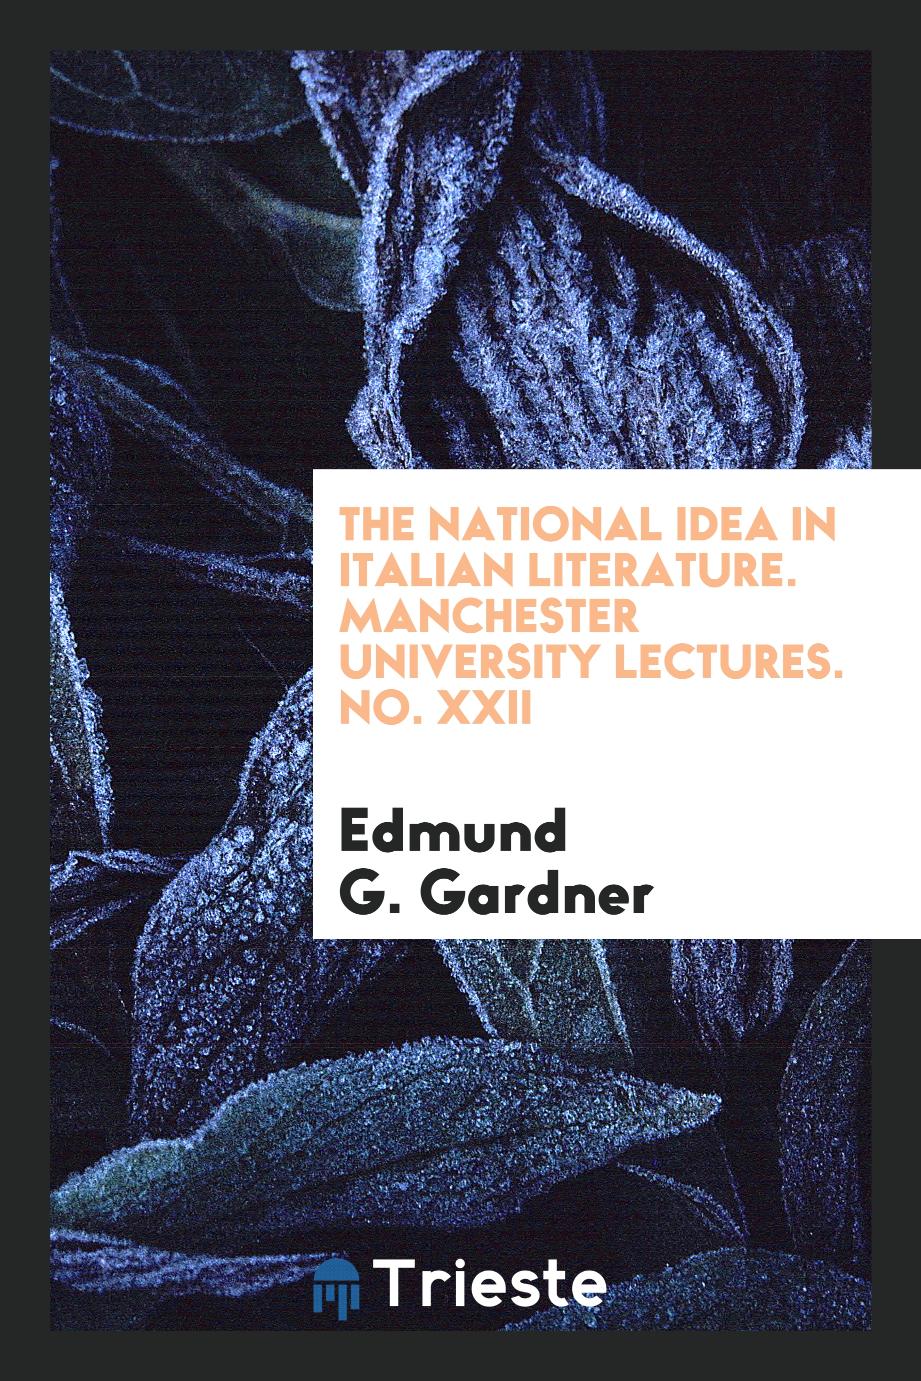 The national idea in Italian literature. Manchester University lectures. No. XXII